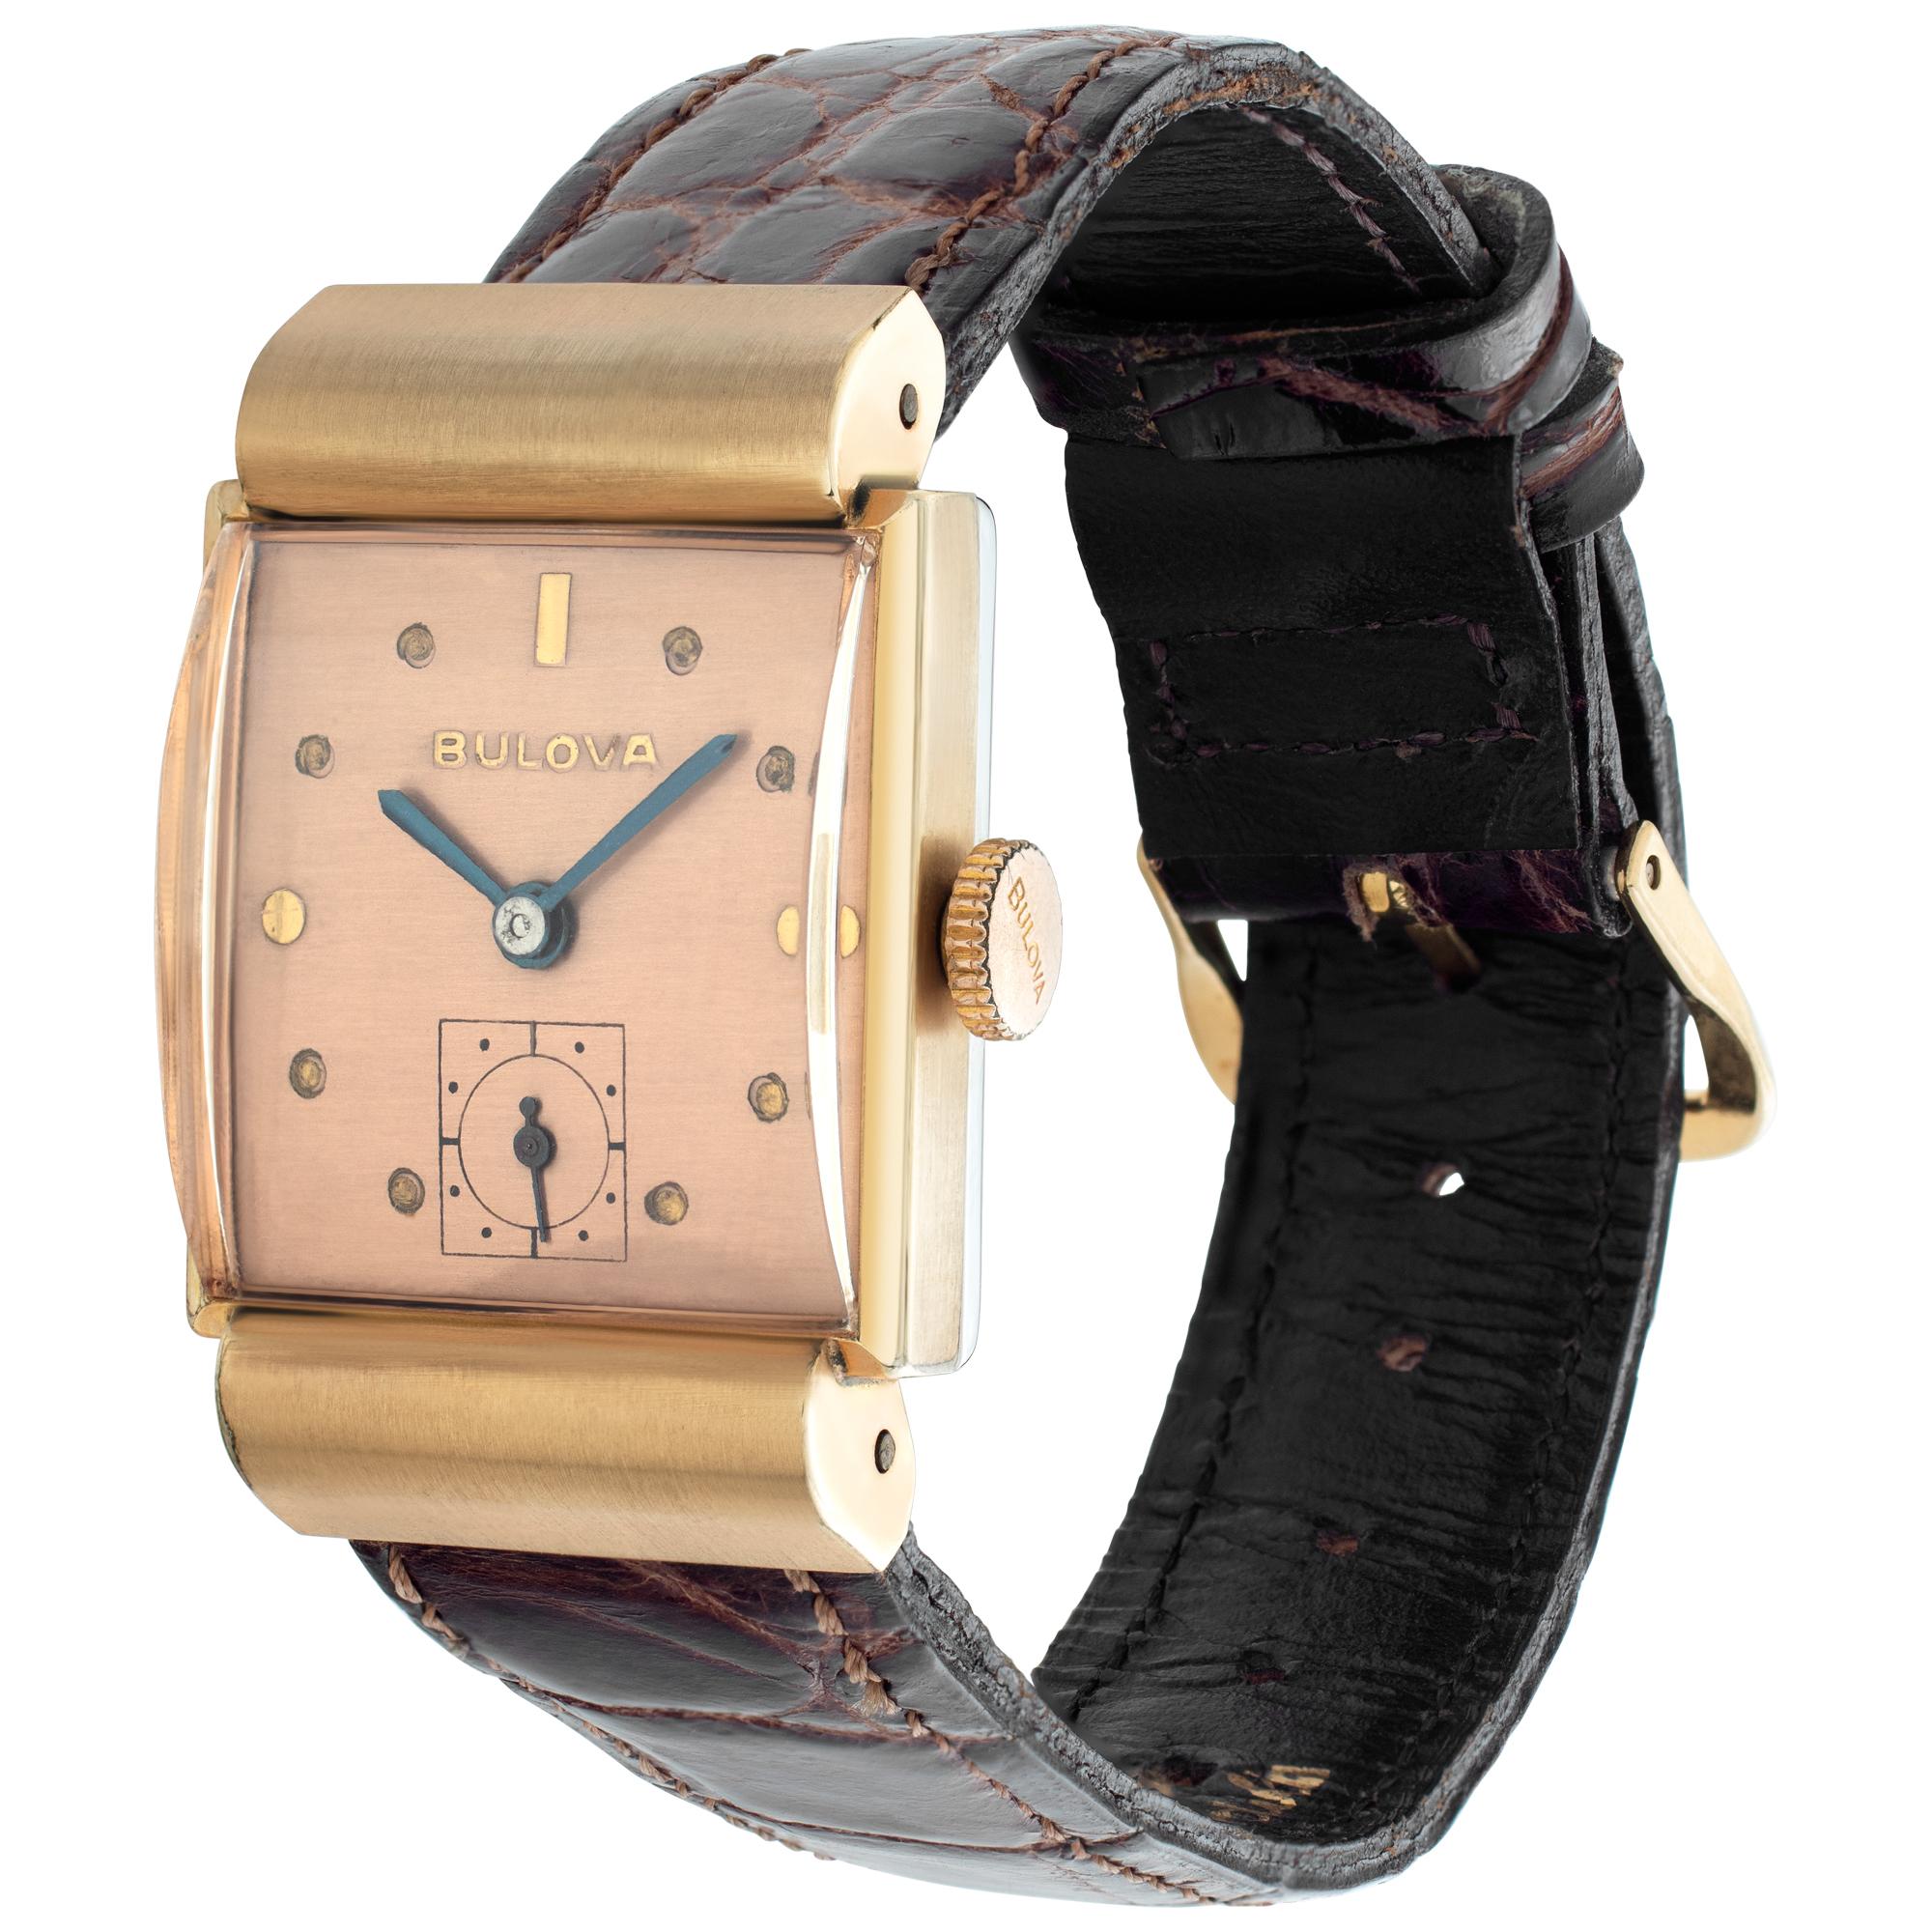 Unisex Bulova gold fill case & bezel with hooded lugs on a leather leather band. Manual wind 17 jewel movement. Circa 1940's. Fine Pre-owned Bulova Watch. Certified preowned Vintage Bulova watch on a Brown Leather band with a Gold Fill tang buckle.